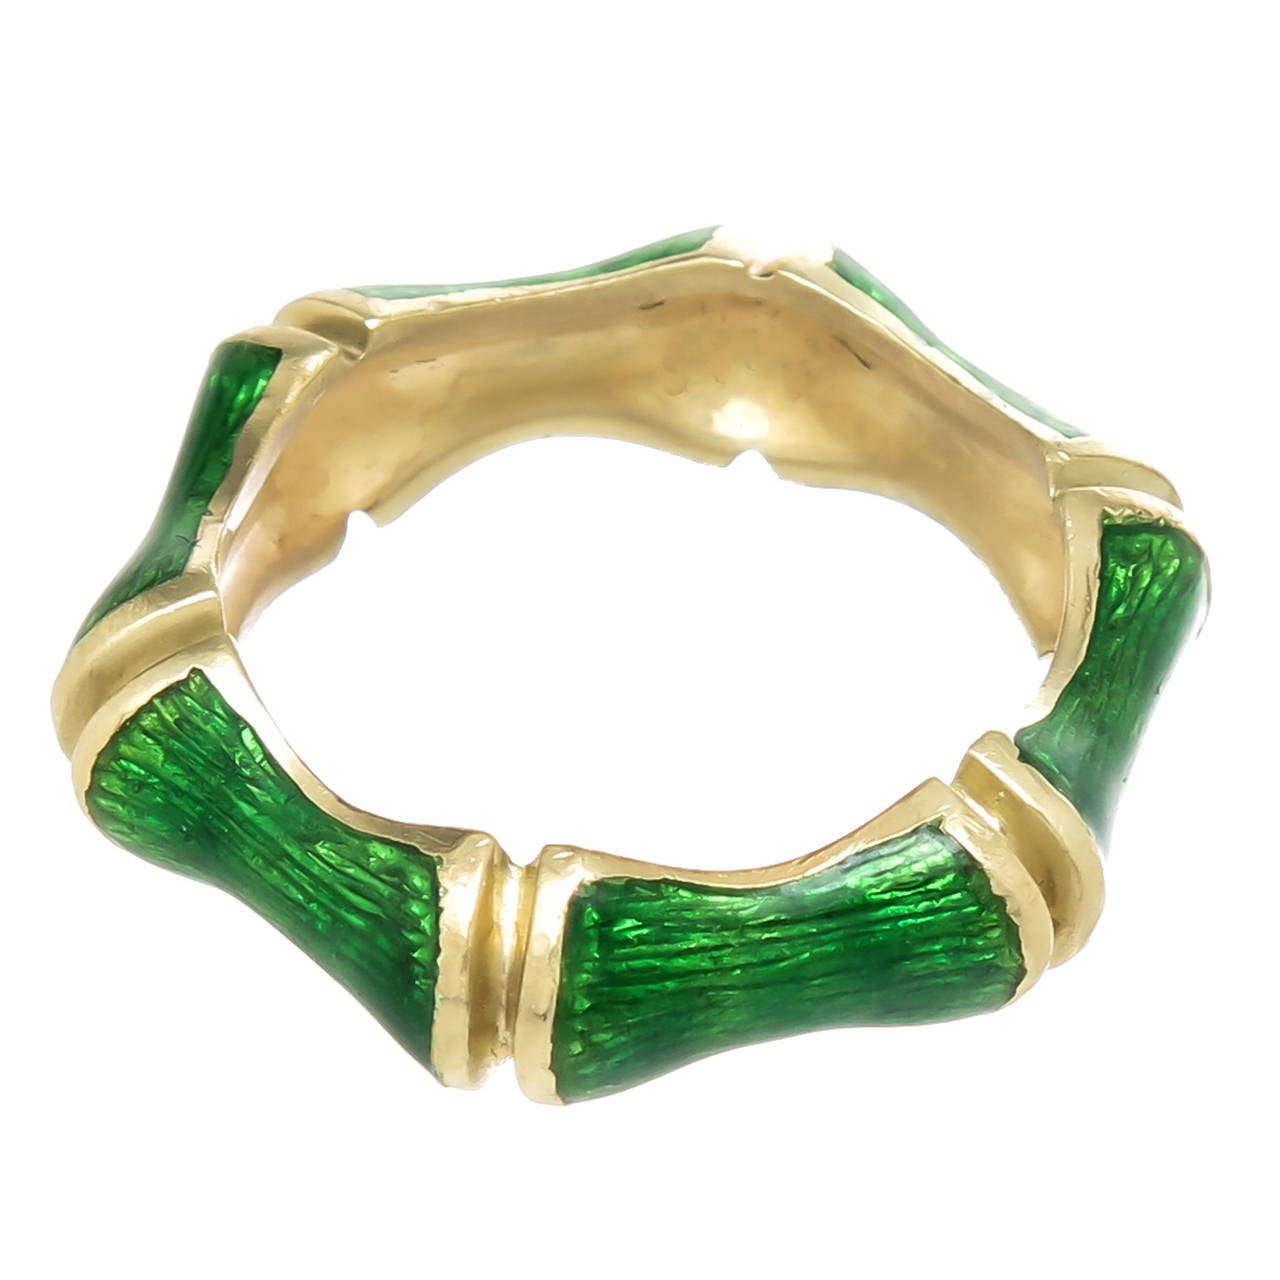 Circa 1970s Tiffany & Co. 18K yellow gold and green guilloche enamel bamboo form band ring measuring 1/4 inch wide. Finger size = 7 3/4.